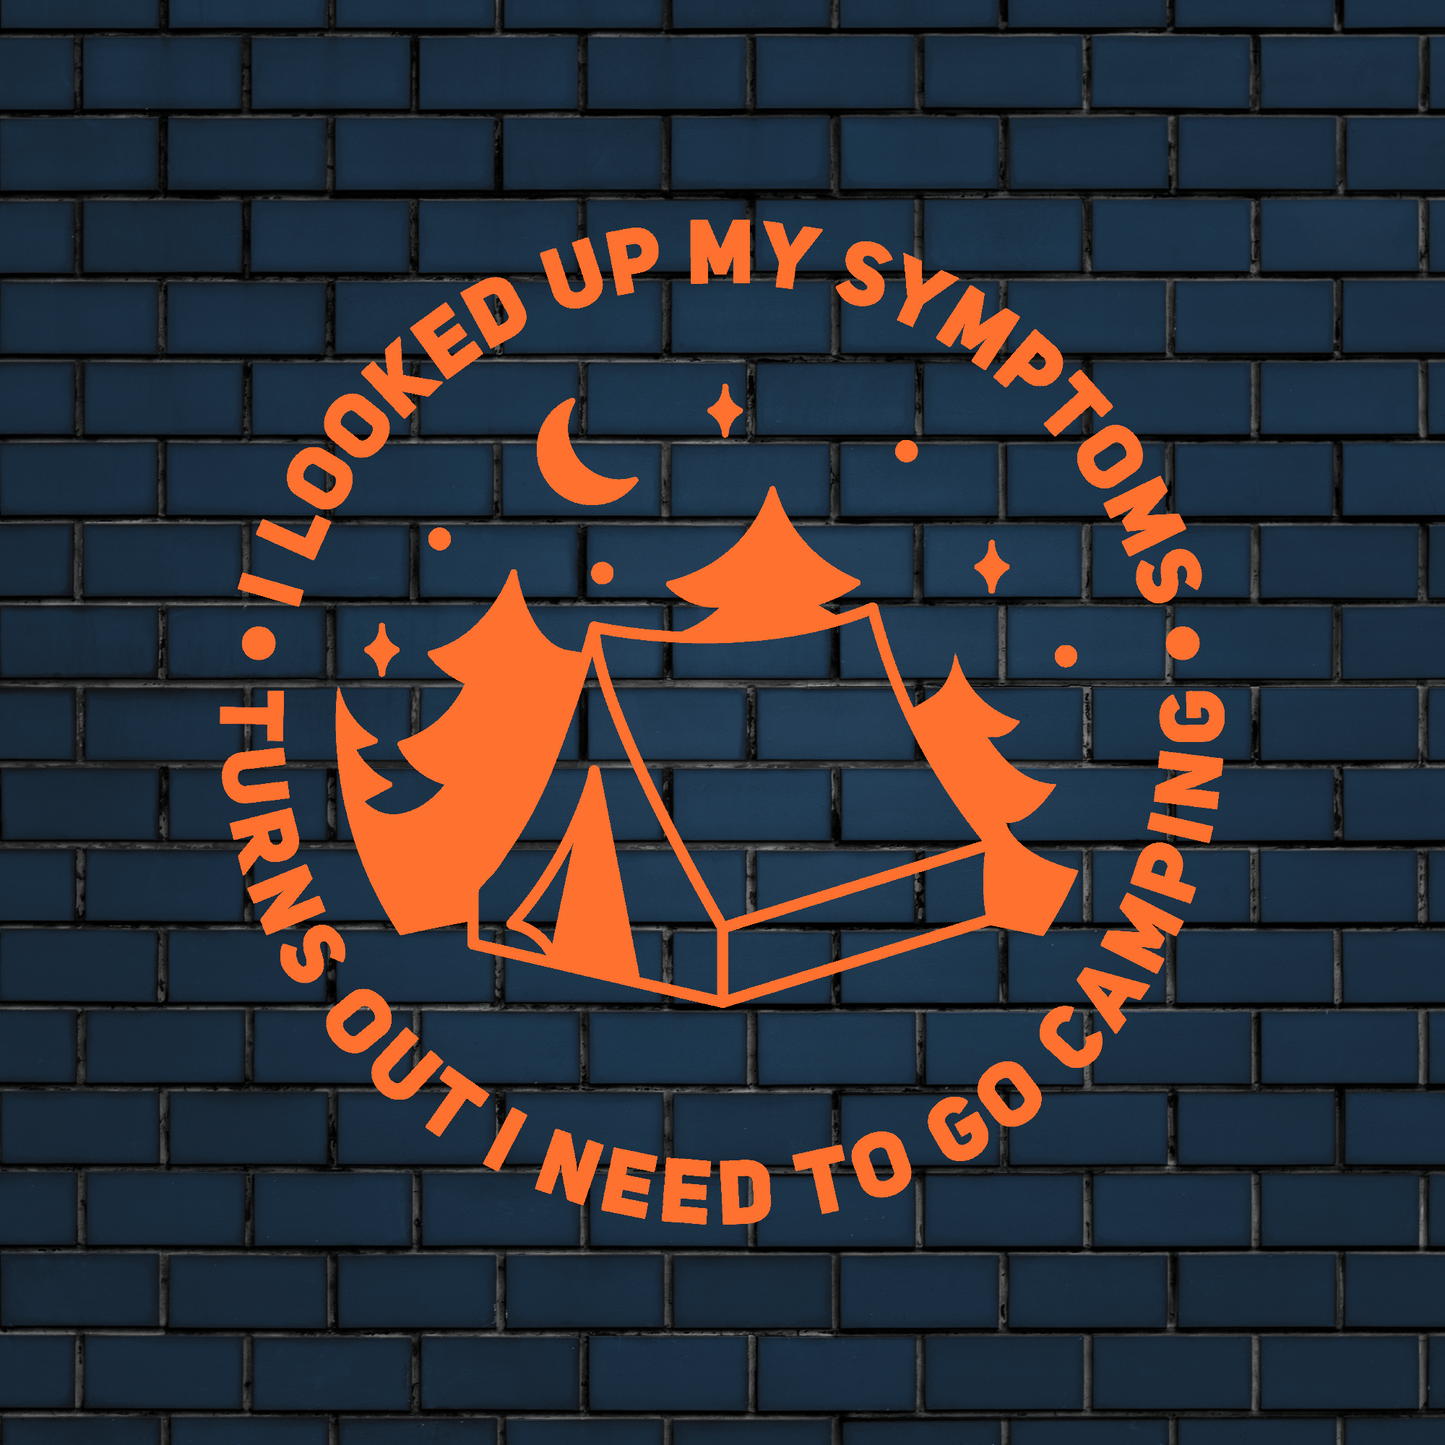 I looked up my symptoms, i need to go camping decal